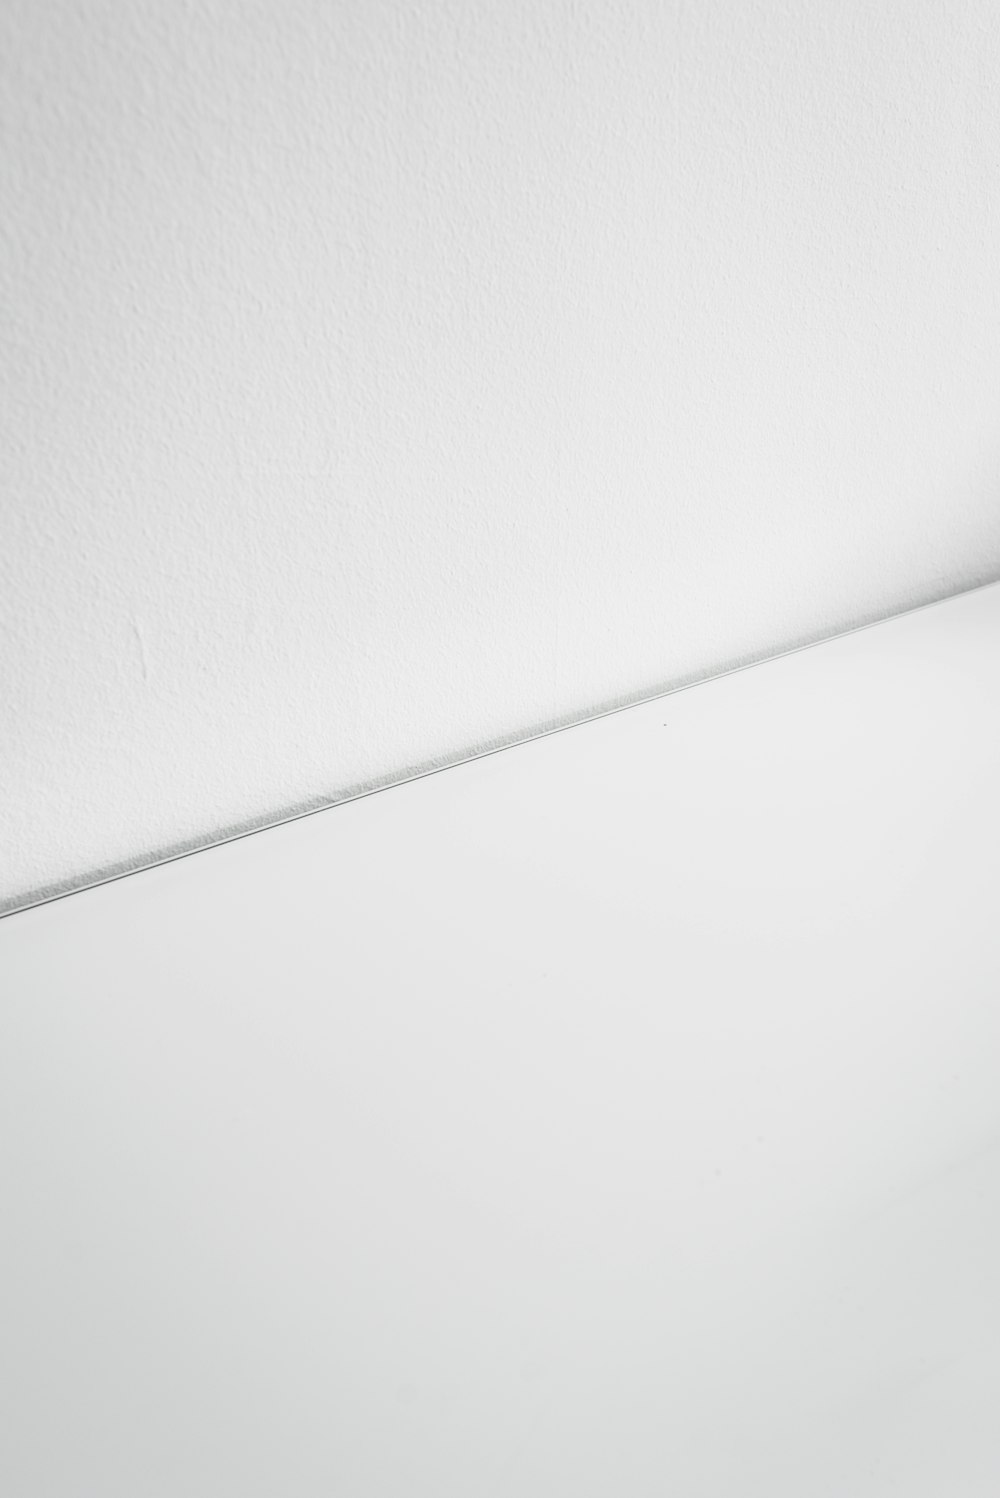 white wall paint with white paint